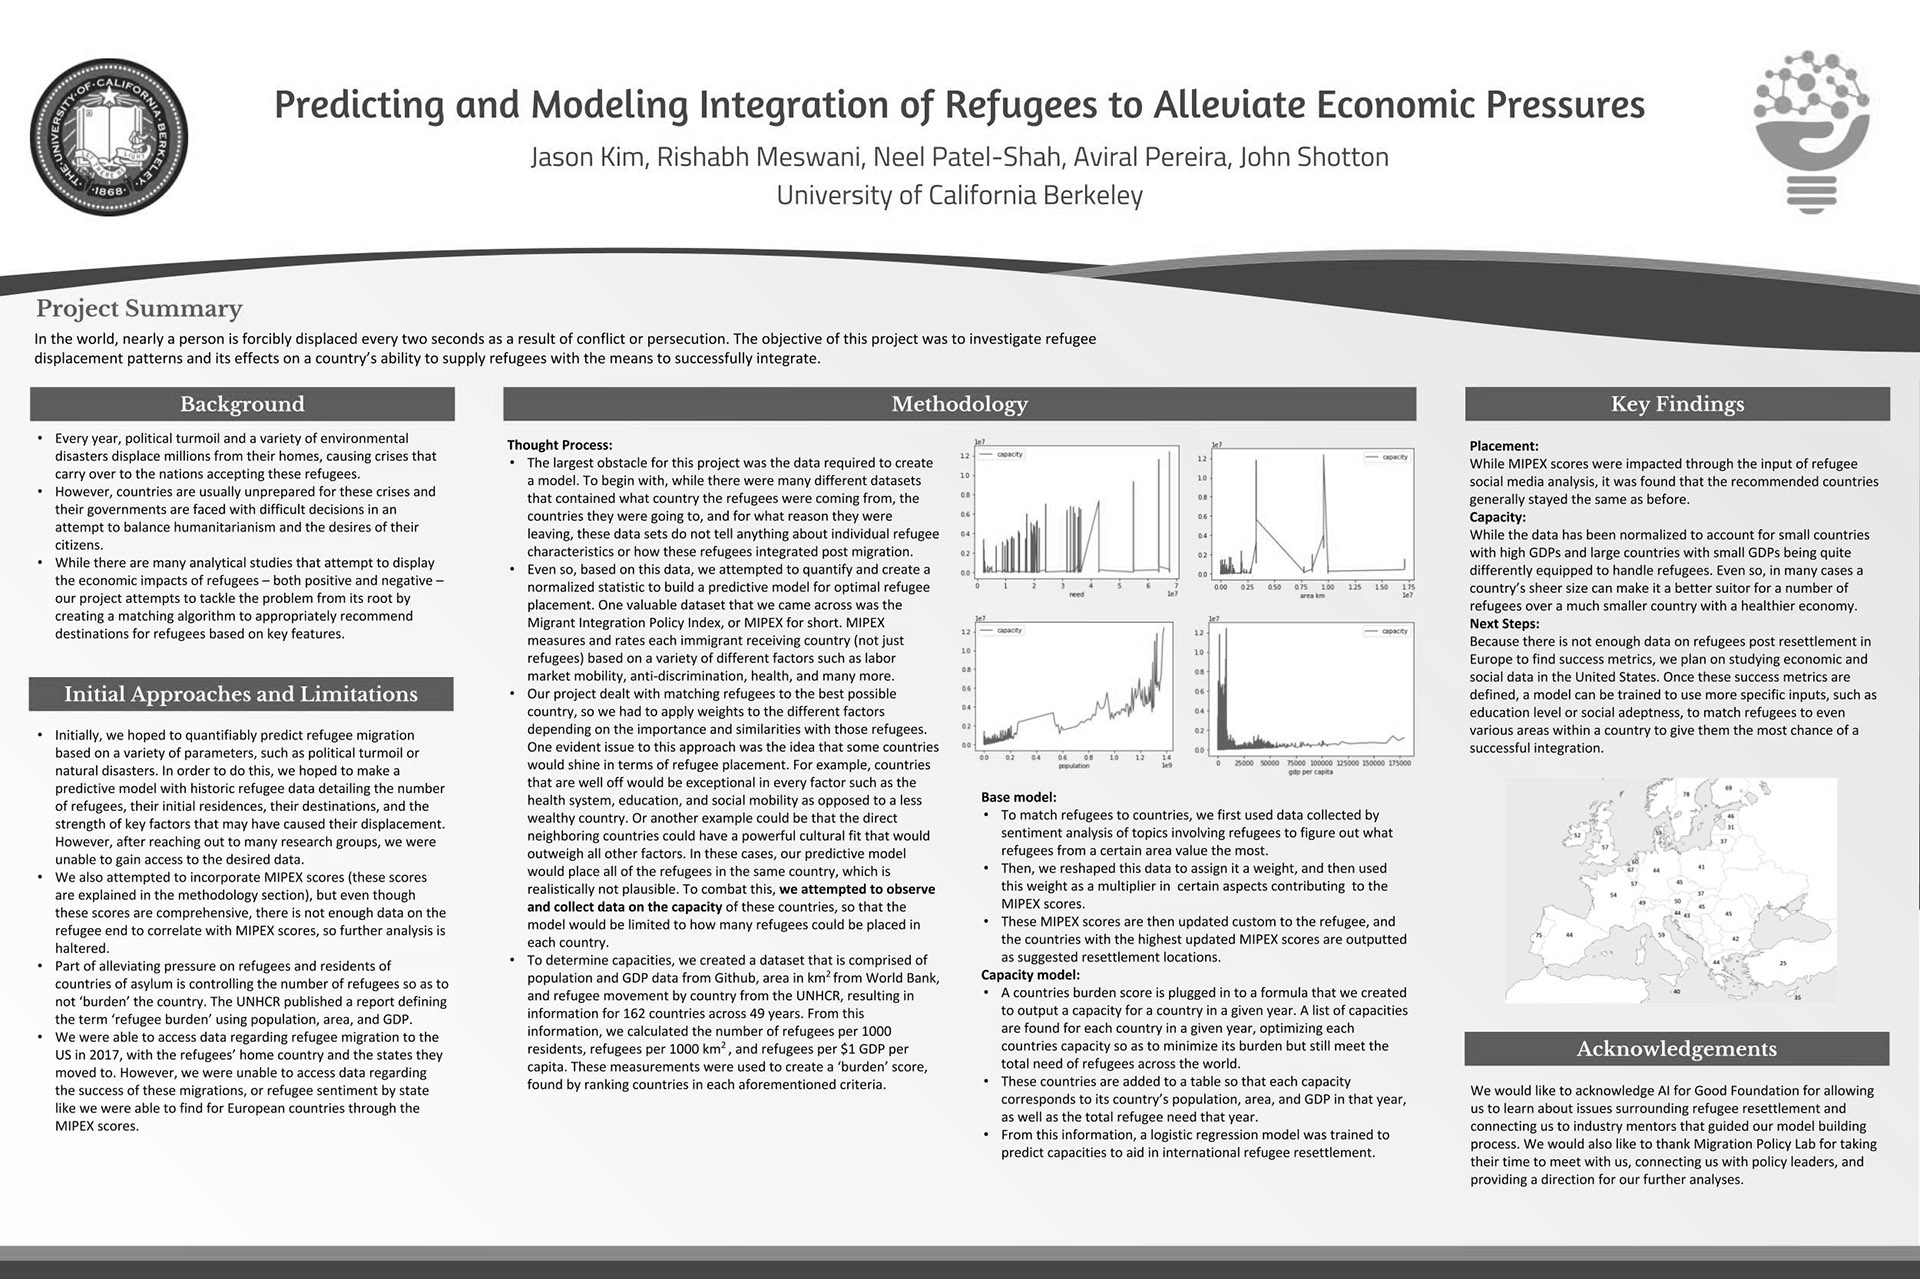 Predicting and modeling integration of refugees